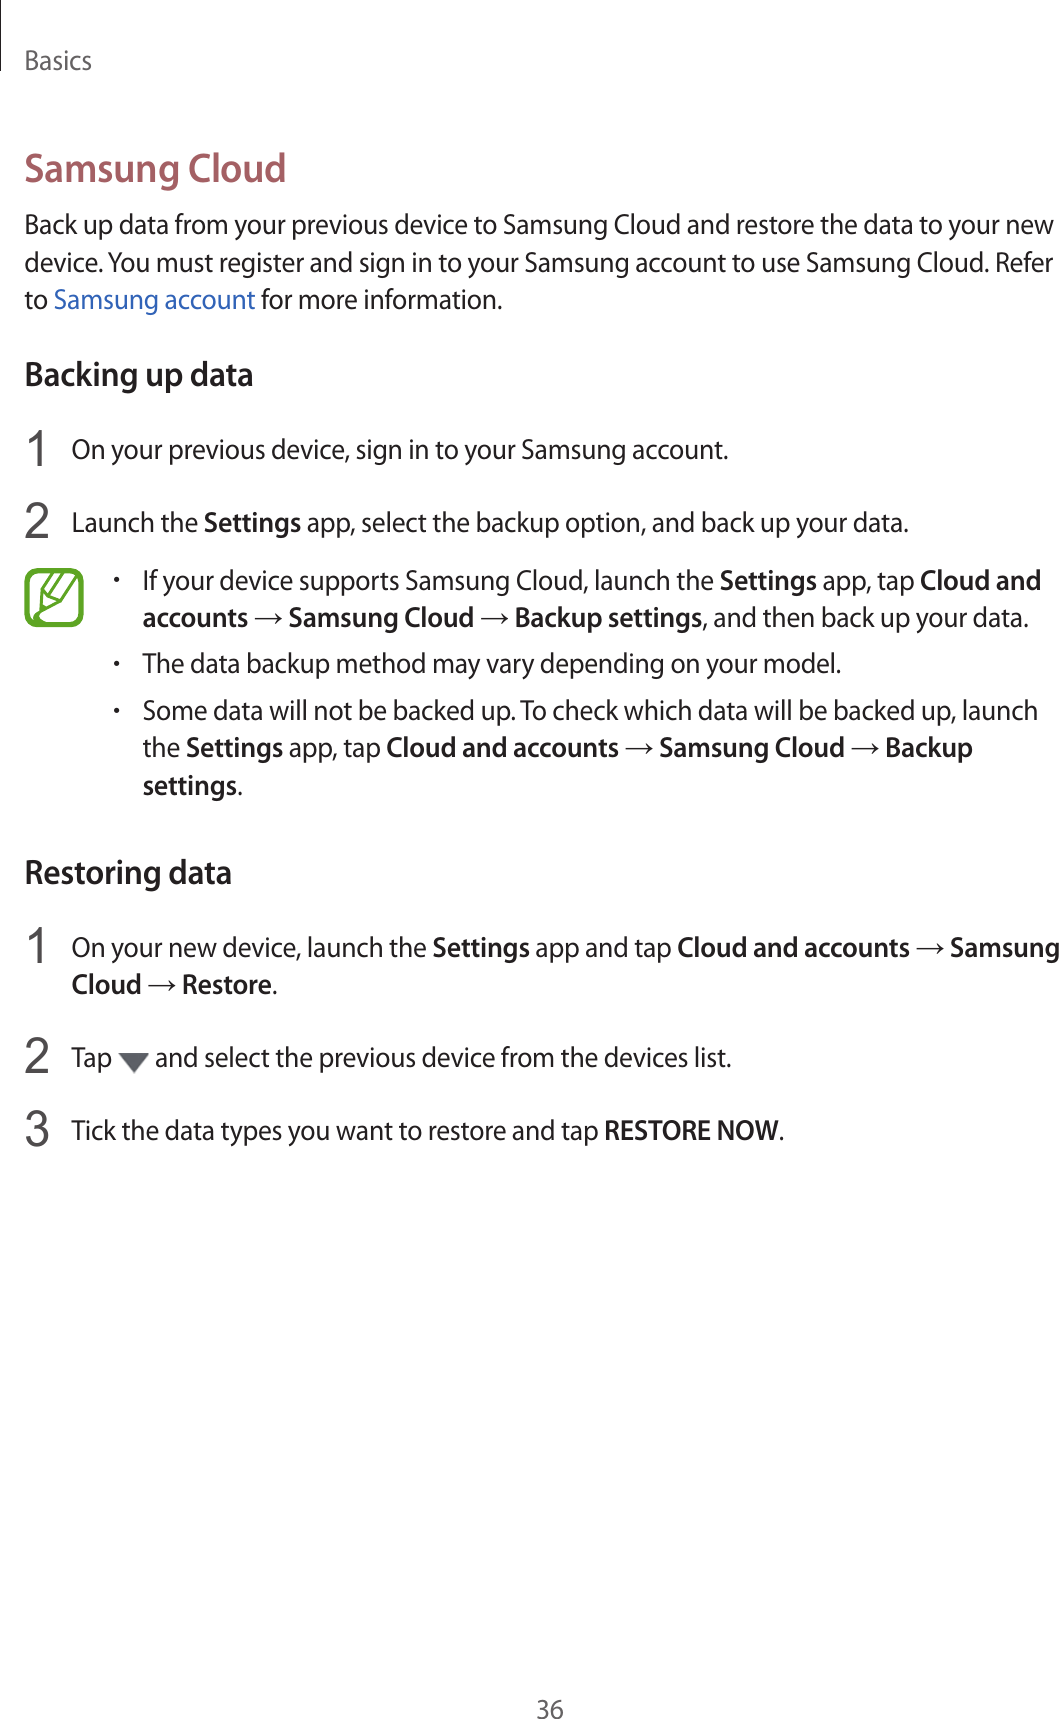 Basics36Samsung CloudBack up data from your previous device to Samsung Cloud and restore the data to your new device. You must register and sign in to your Samsung account to use Samsung Cloud. Refer to Samsung account for more information.Backing up data1  On your previous device, sign in to your Samsung account.2  Launch the Settings app, select the backup option, and back up your data.•If your device supports Samsung Cloud, launch the Settings app, tap Cloud and accounts → Samsung Cloud → Backup settings, and then back up your data.•The data backup method may vary depending on your model.•Some data will not be backed up. To check which data will be backed up, launch the Settings app, tap Cloud and accounts → Samsung Cloud → Backup settings.Restoring data1  On your new device, launch the Settings app and tap Cloud and accounts → Samsung Cloud → Restore.2  Tap   and select the previous device from the devices list.3  Tick the data types you want to restore and tap RESTORE NOW.